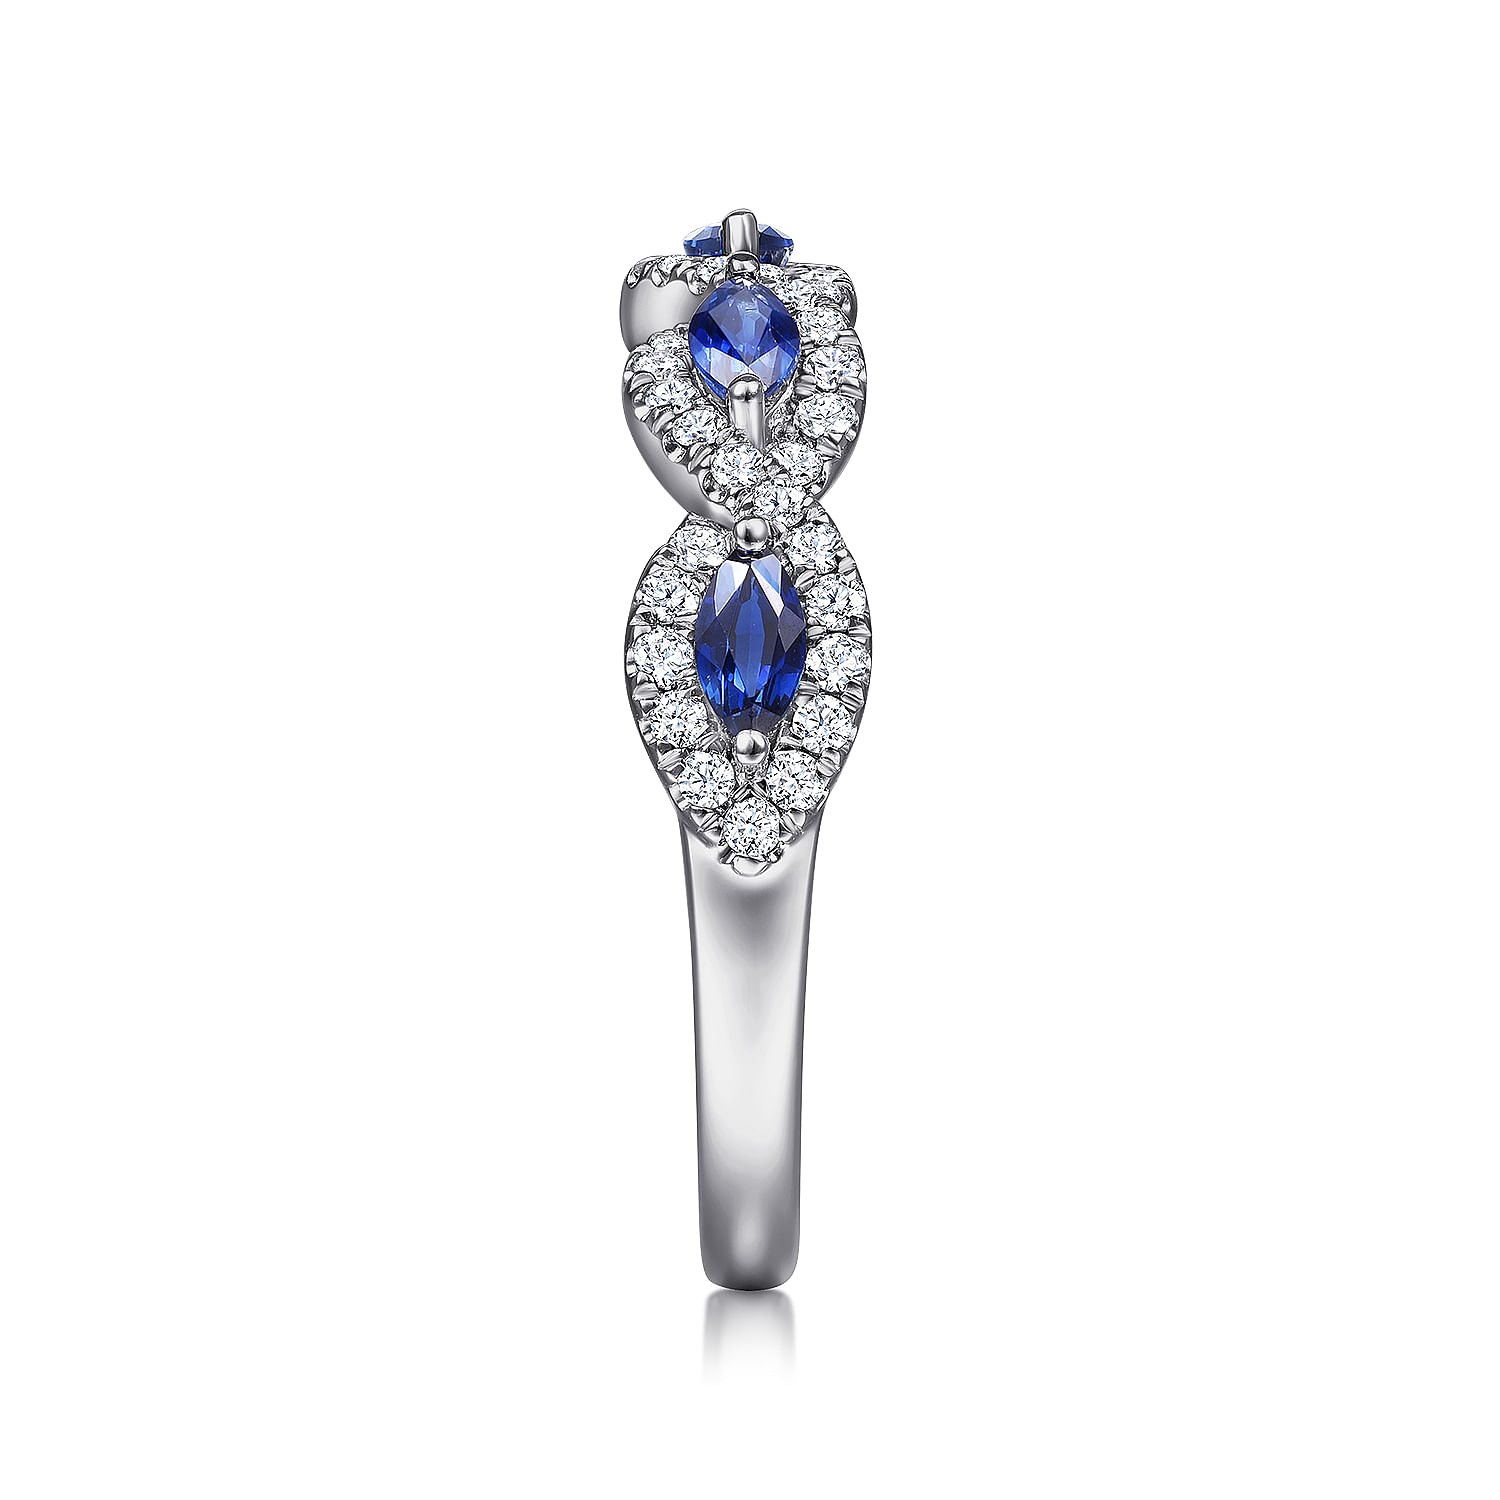 14K White Gold Diamond and Sapphire Twisted Ring